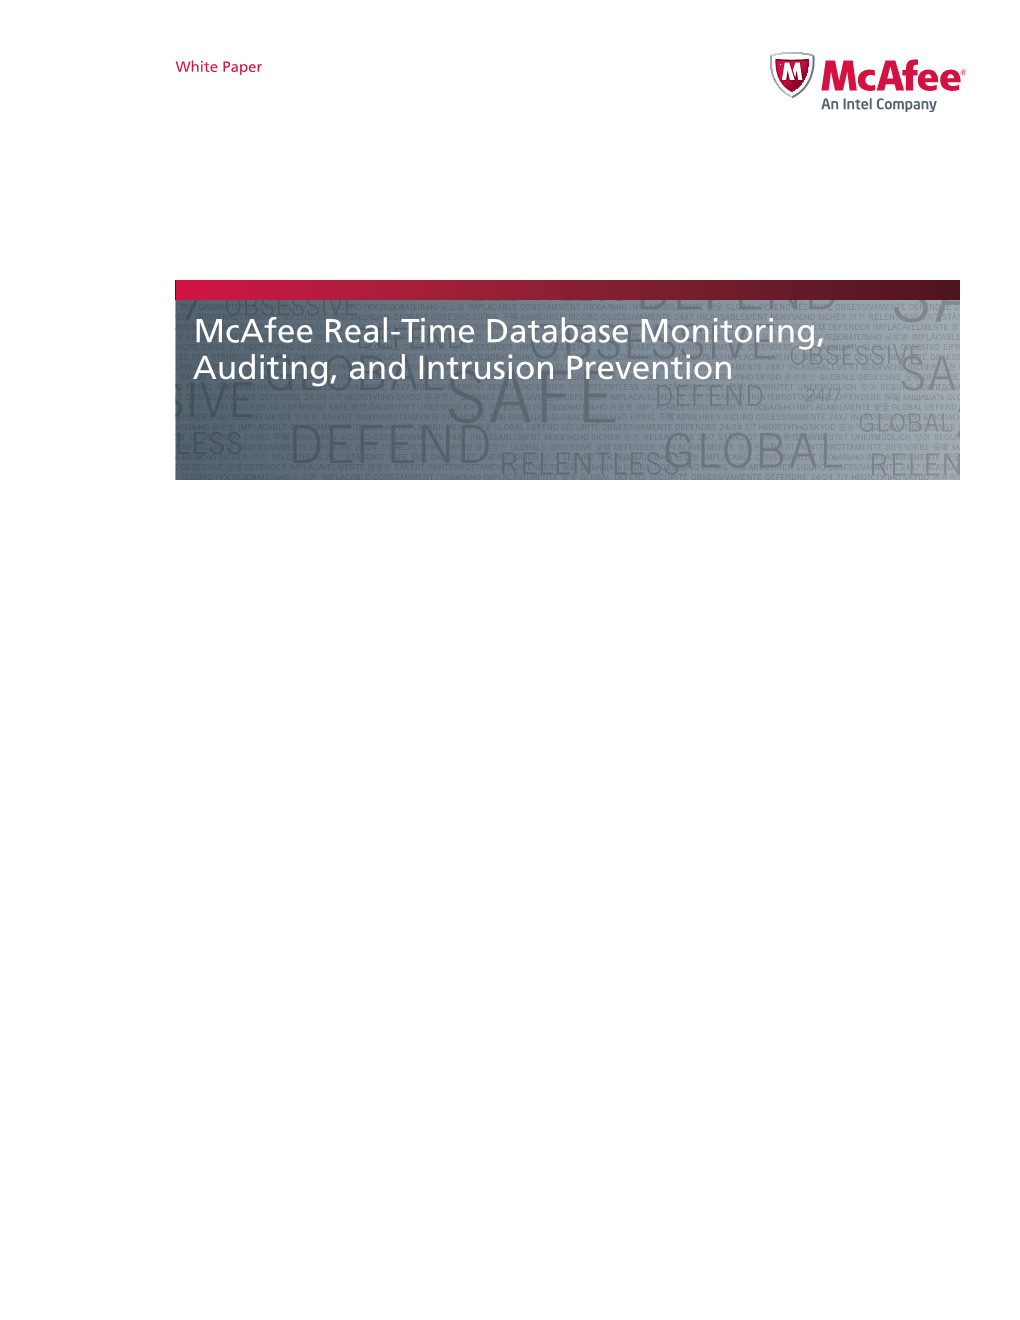 Mcafee Real-Time Database Monitoring, Auditing, and Intrusion